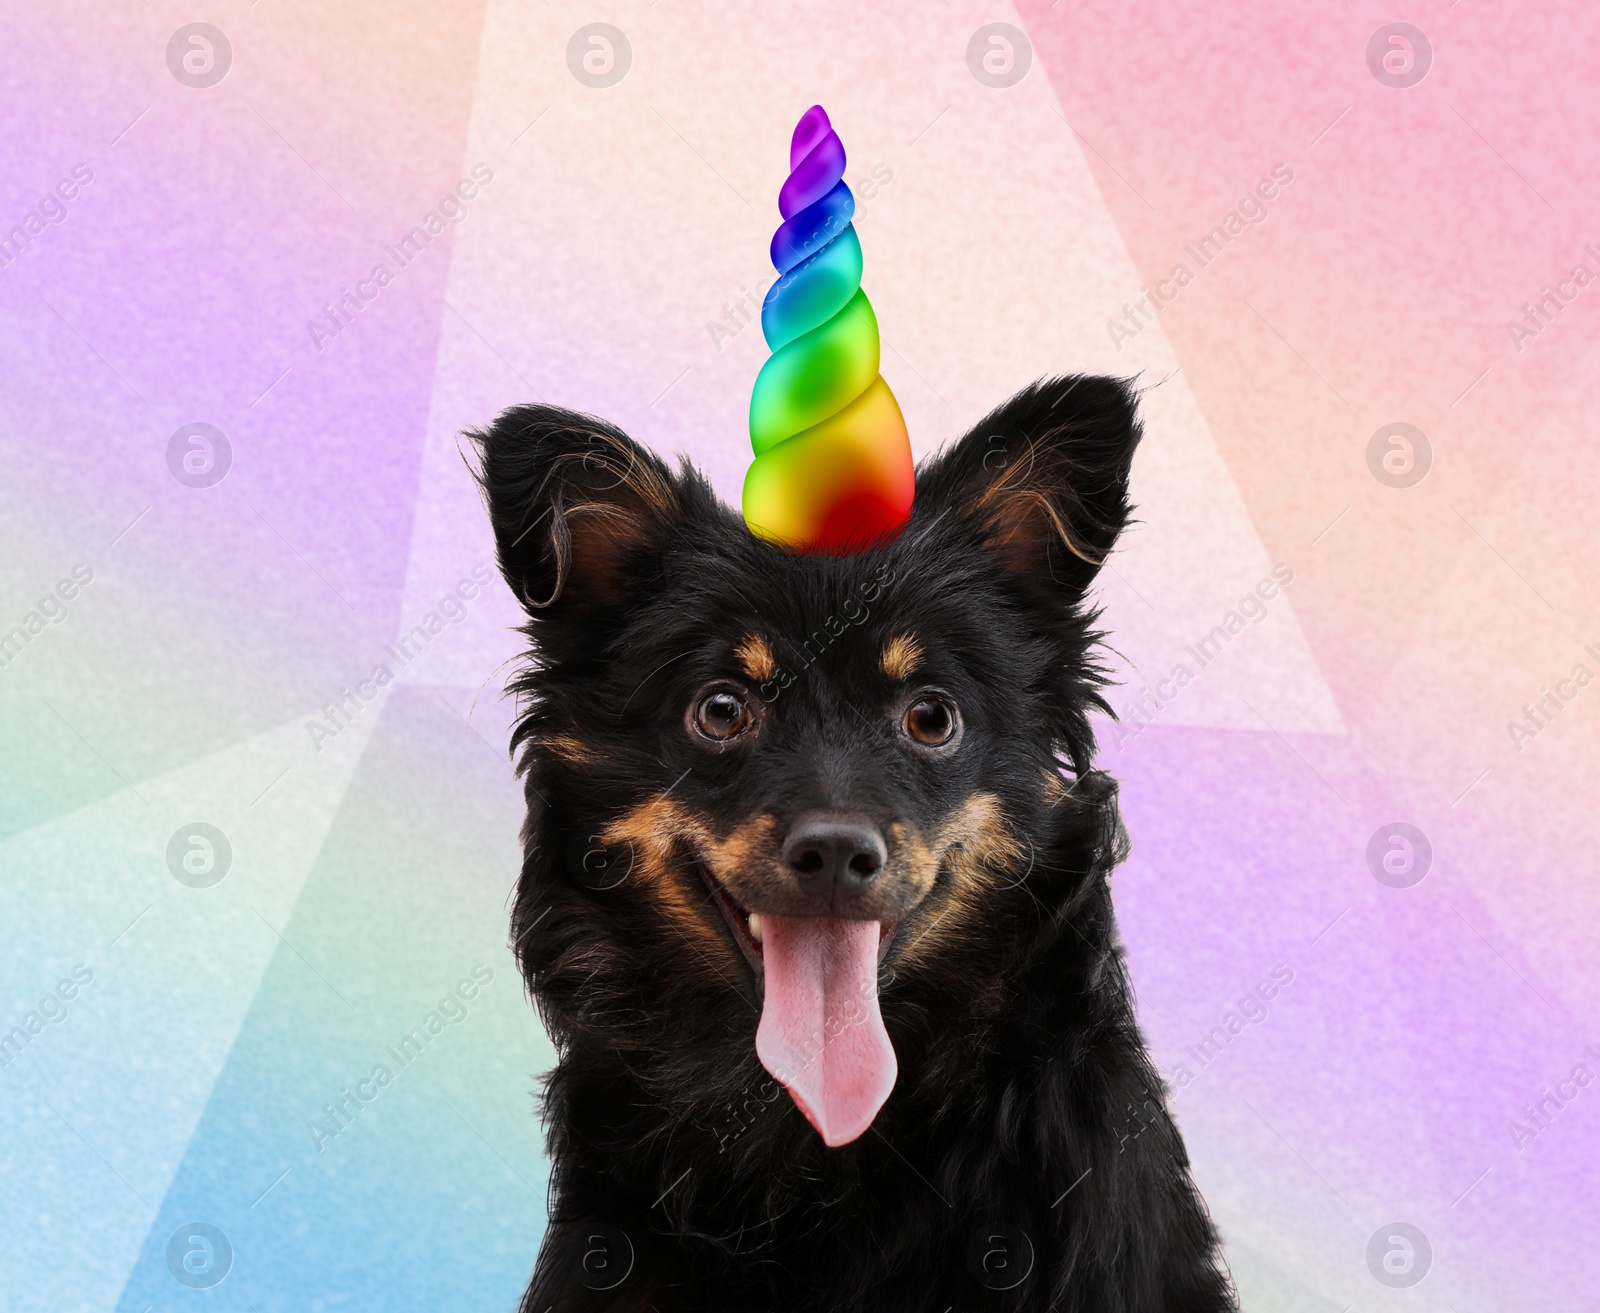 Image of Cute dog with rainbow unicorn horn on blurred background